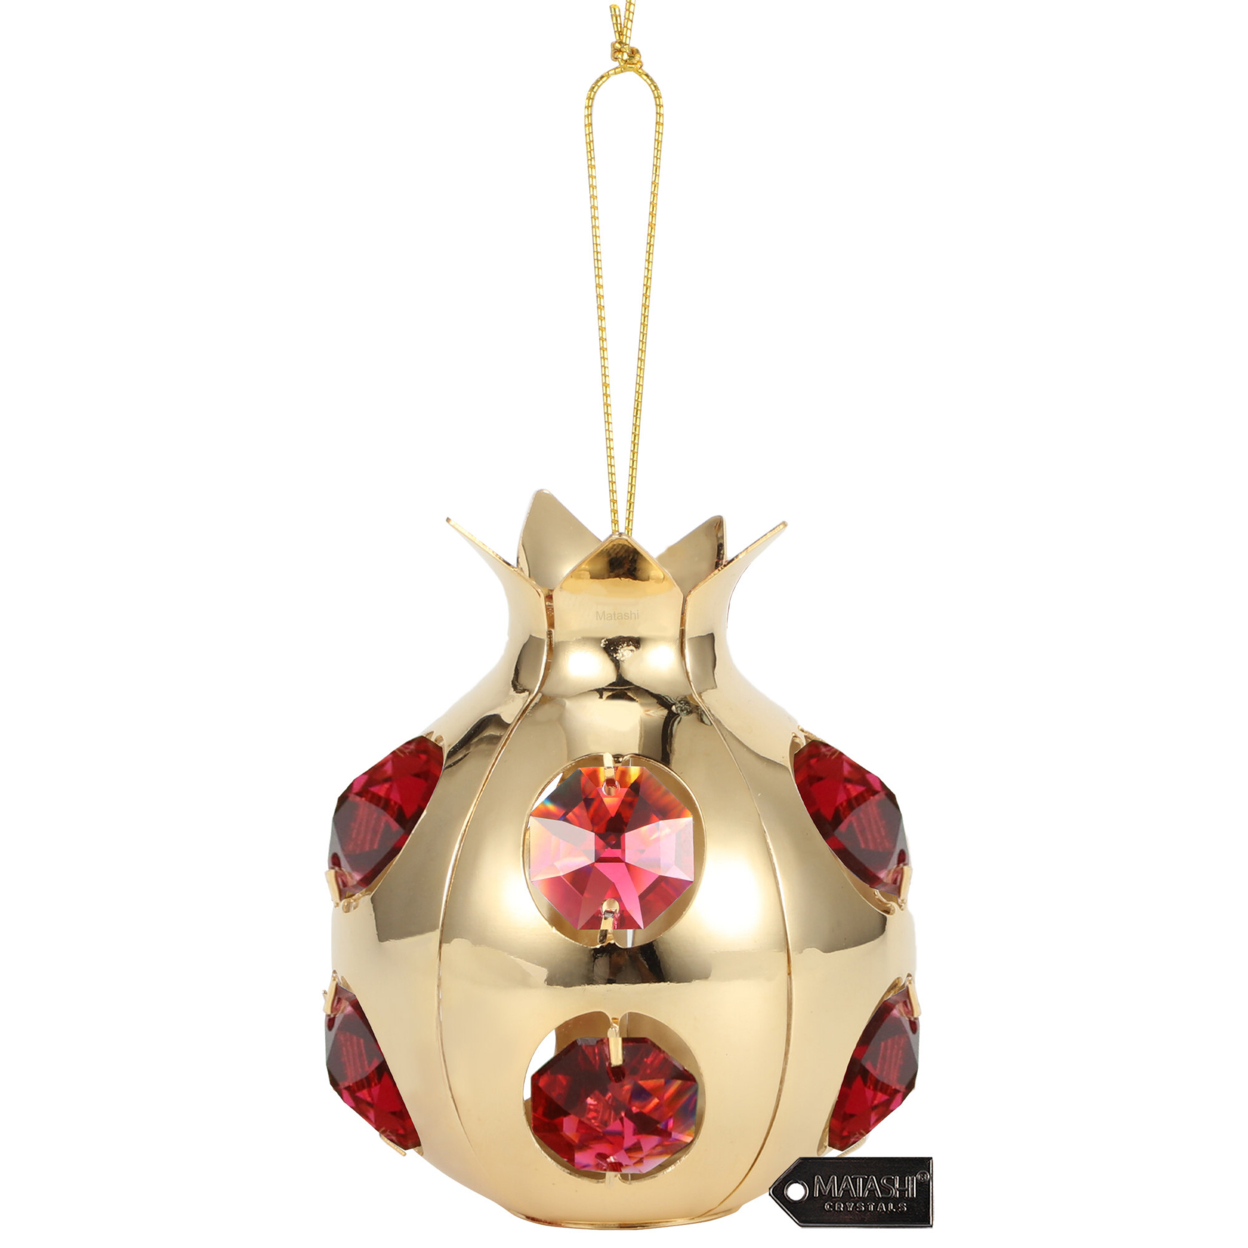 Matashi 24K Gold Plated Pomegranate Fruit Ornament With Red Crystals, Perfect For Sukkot, Holidays, Christmas Ornament Home Decor Gifts